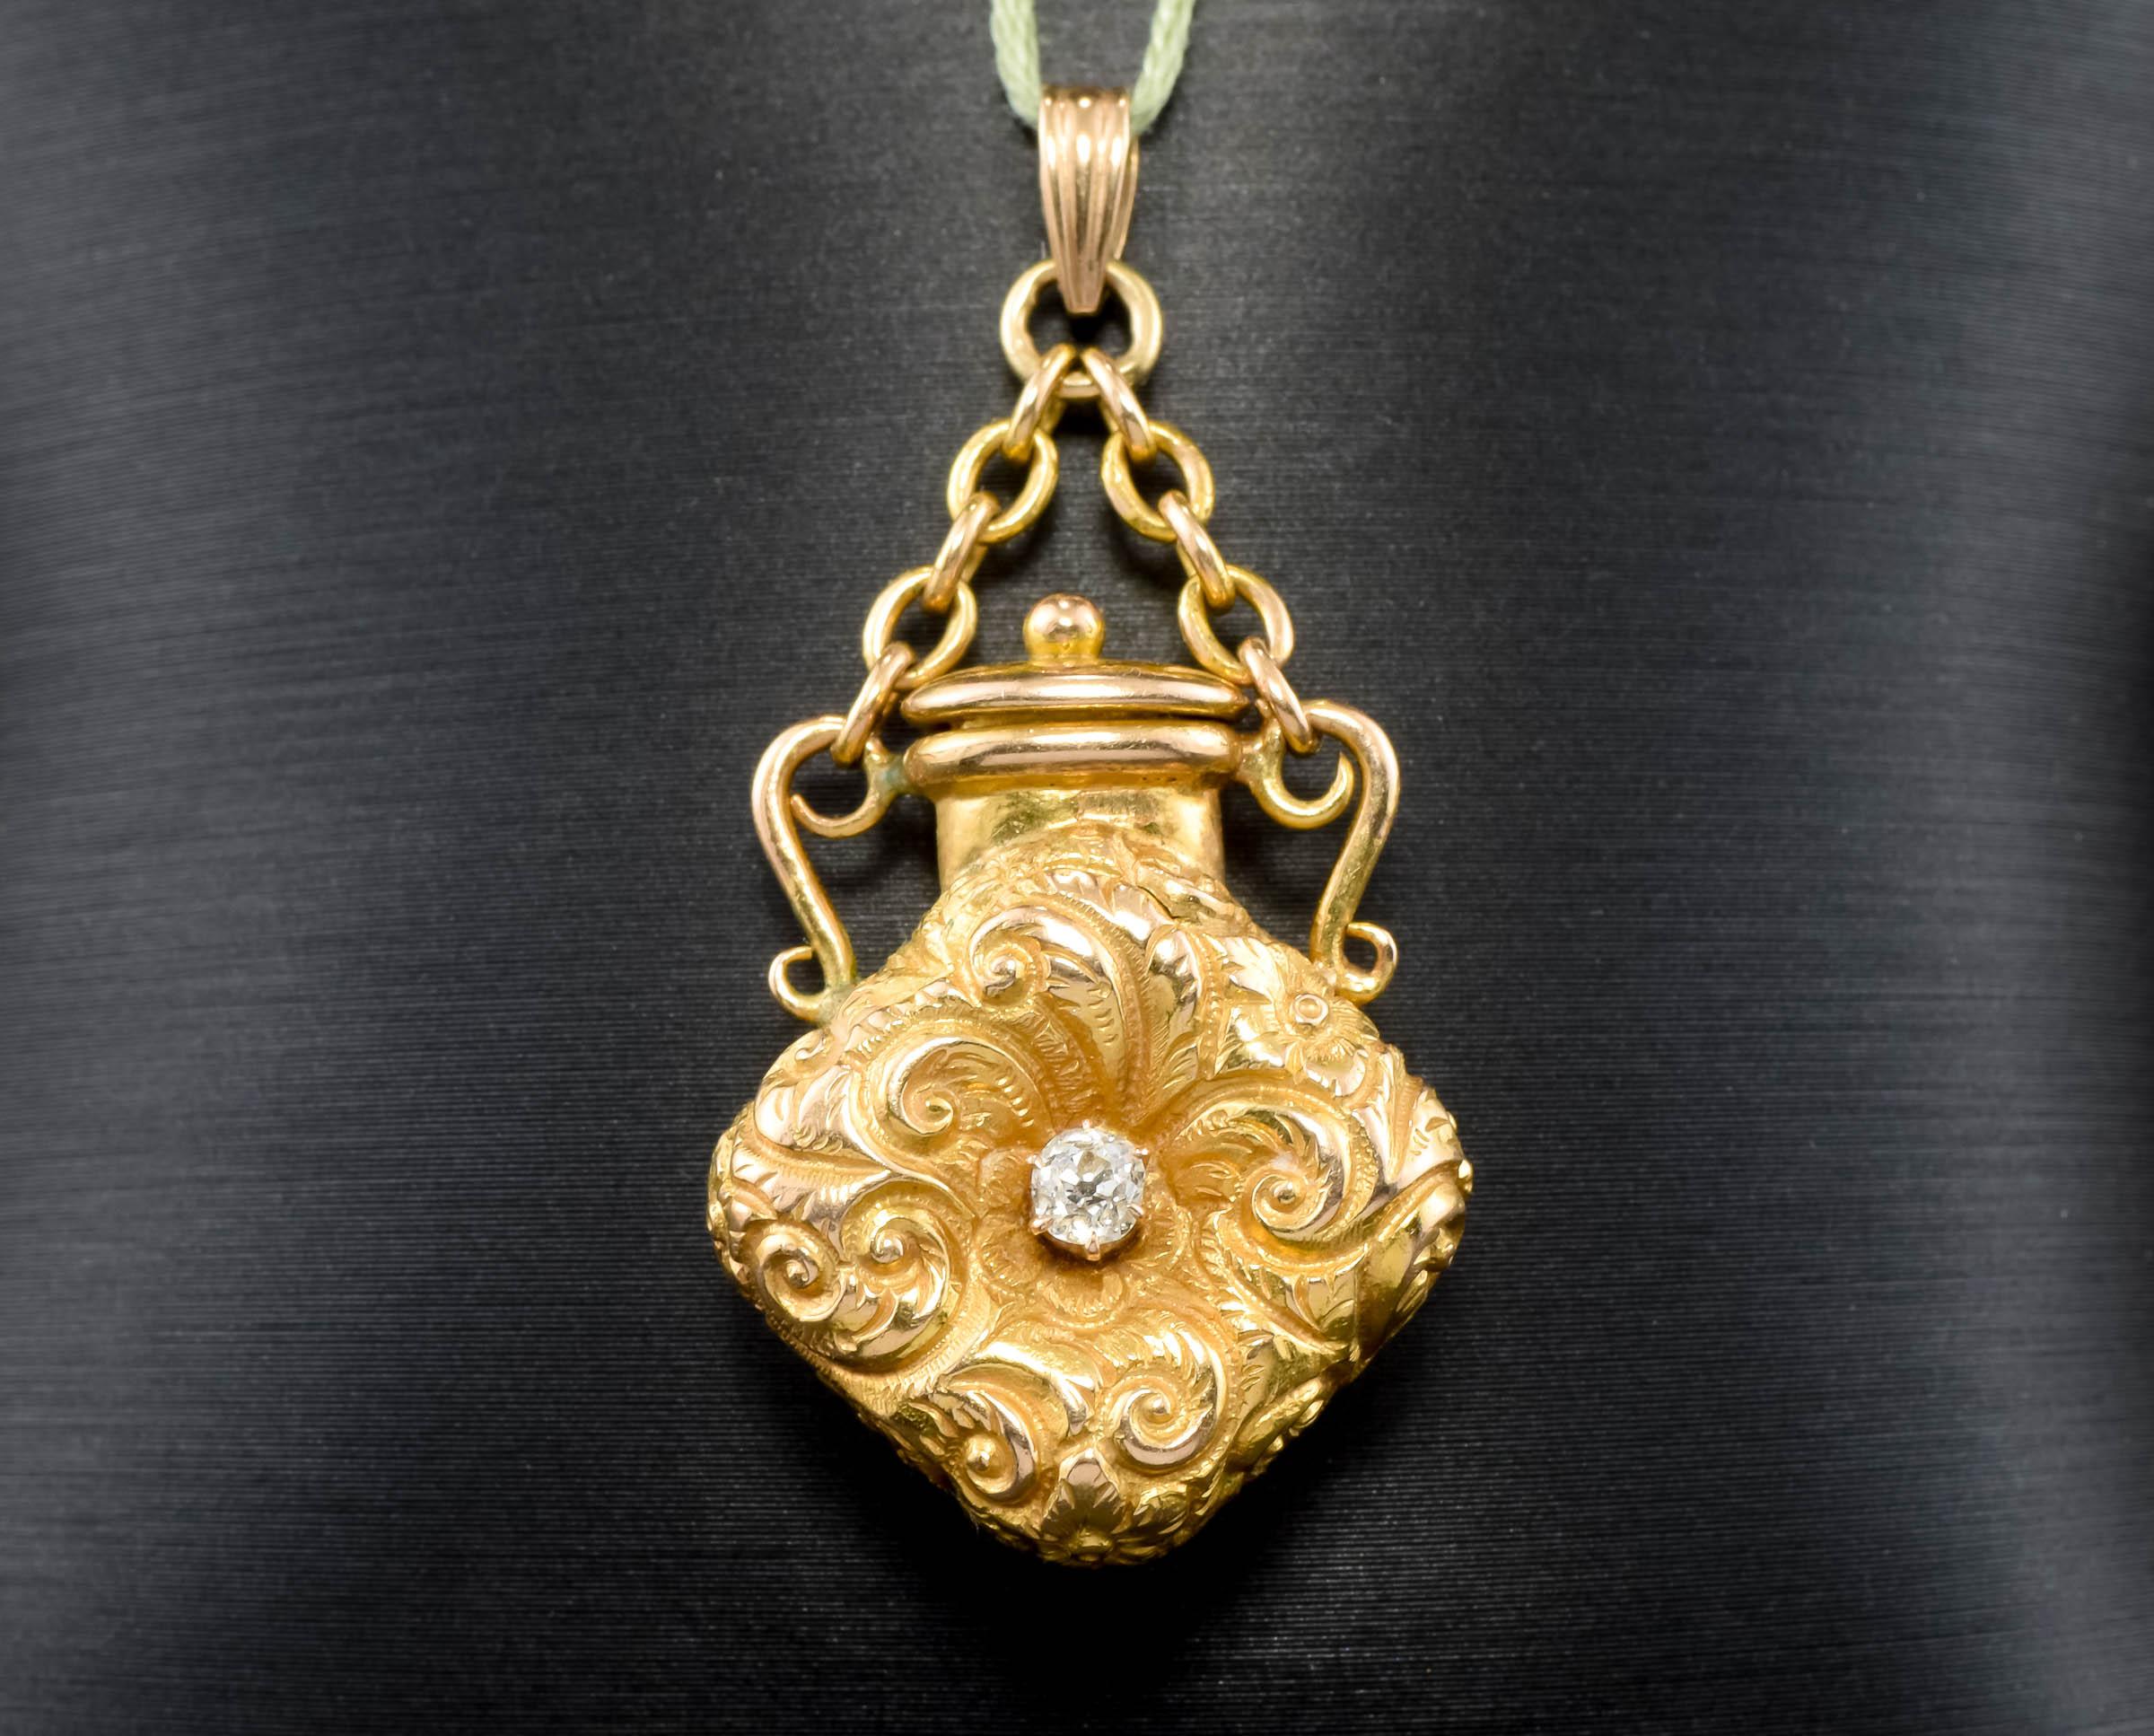 Such an elegant antique gold scent bottle dating to the Victorian period - with a fiery little old mine cut diamond, the bottle's original chain and even the little chain that attaches to the bottle's lid.

Crafted of solid 14K gold, the antique